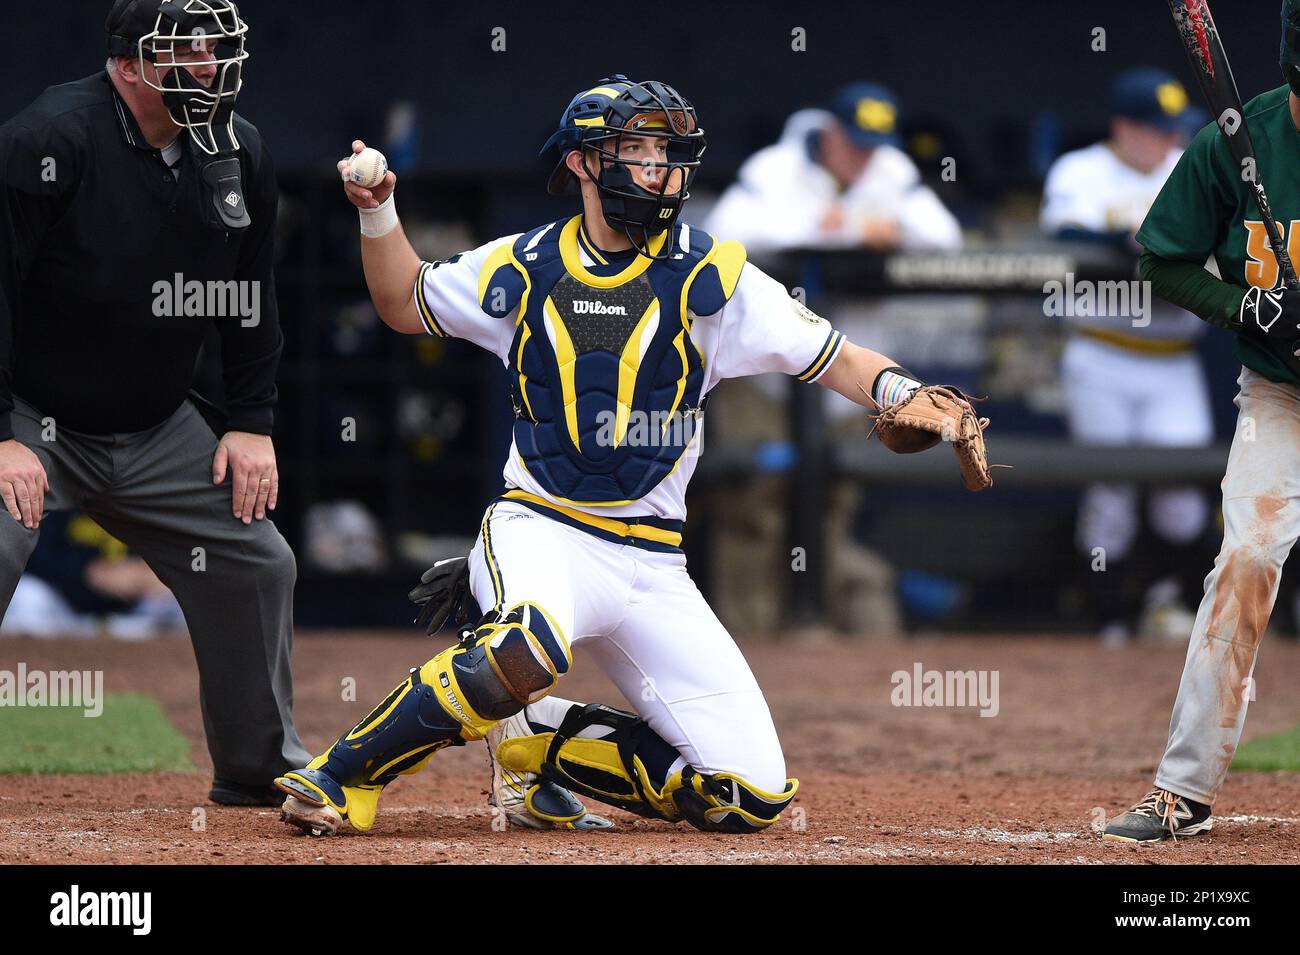 Michigan Wolverines catcher/infielder Drew Lugbauer (17) during the second  game of a doubleheader against the Siena Saints on February 27, 2015 at  Tradition Field in St. Lucie, Florida. Michigan defeated Siena 6-0. (